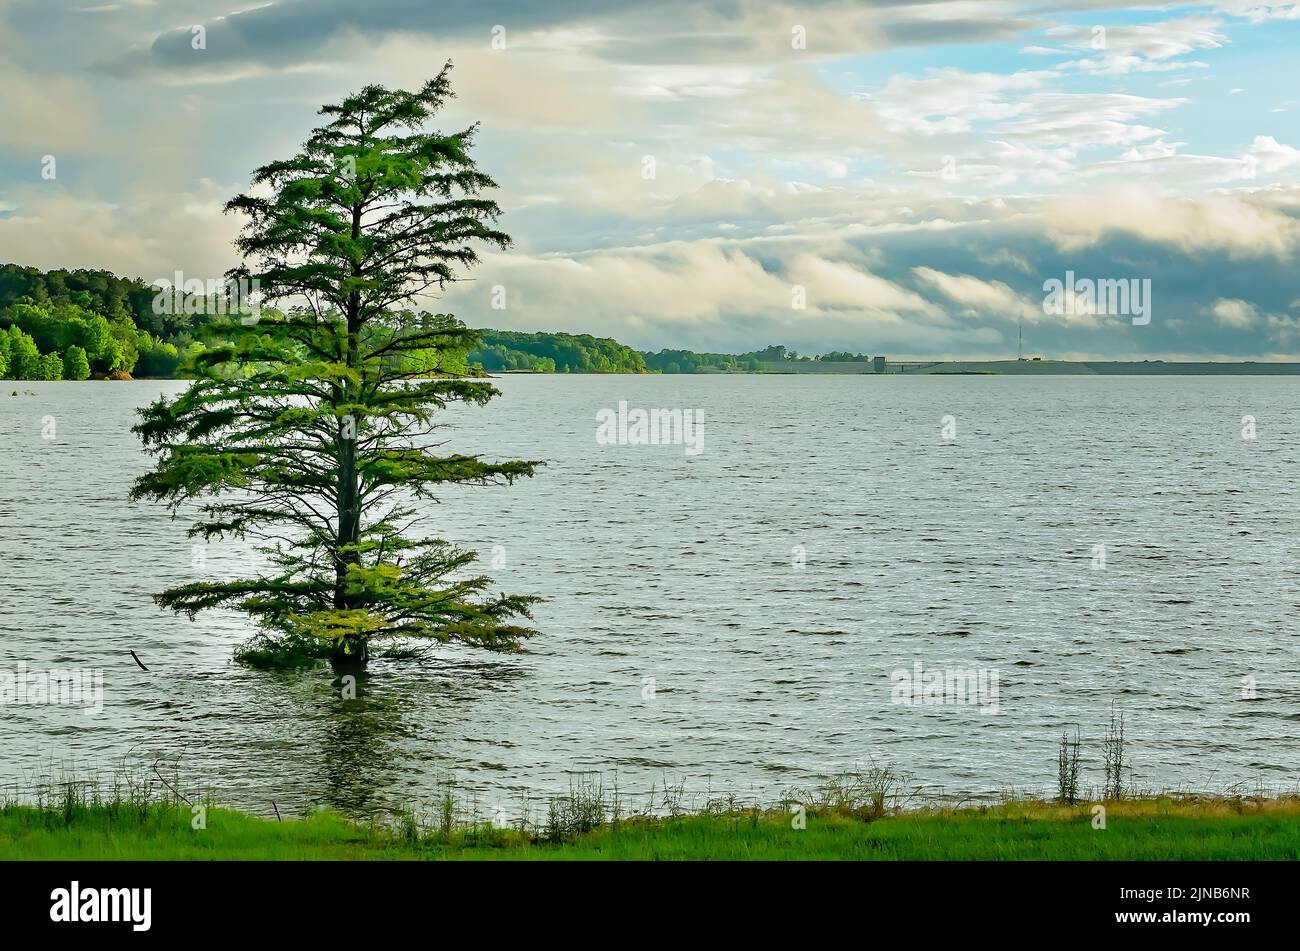 A bald cypress tree (Taxodium distichum) grows along the edge of Sardis Lake, May 31, 2015 in Batesville, Mississippi. Stock Photo